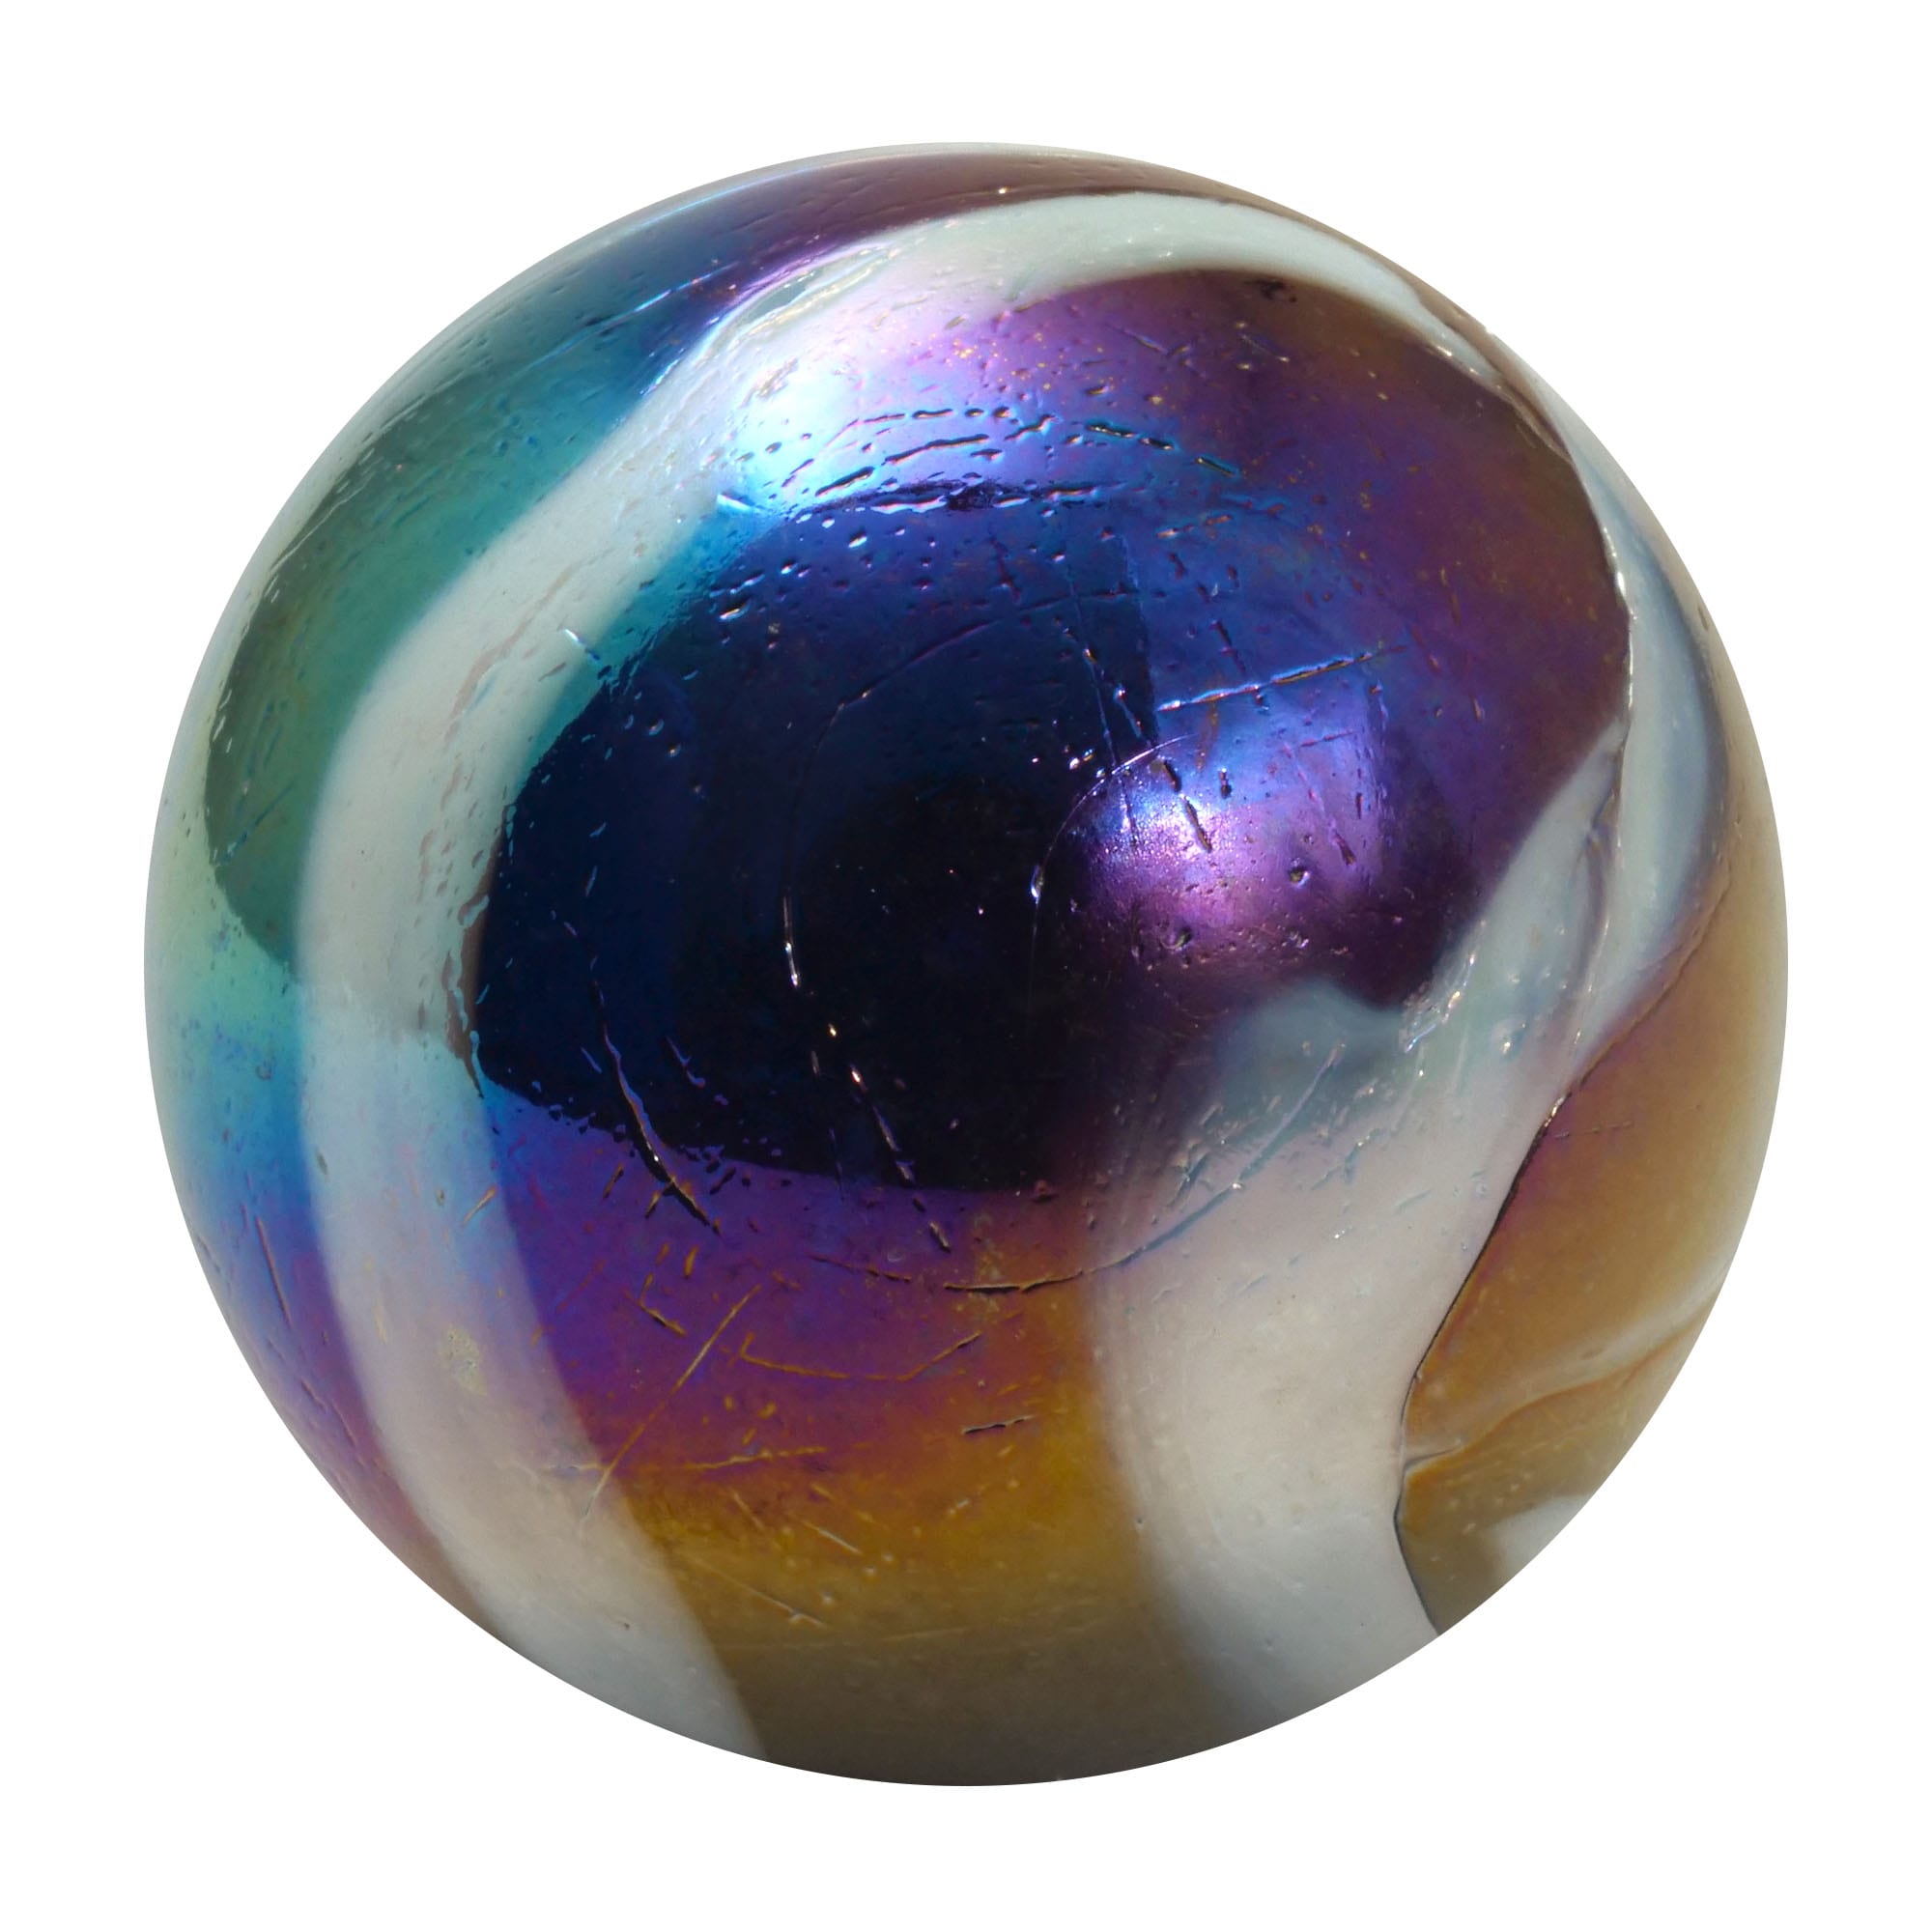 2 BOULDER 1 3/8 INCH 35MM SUPERNOVA BY VACOR MARBLES FREE SHIPPING 